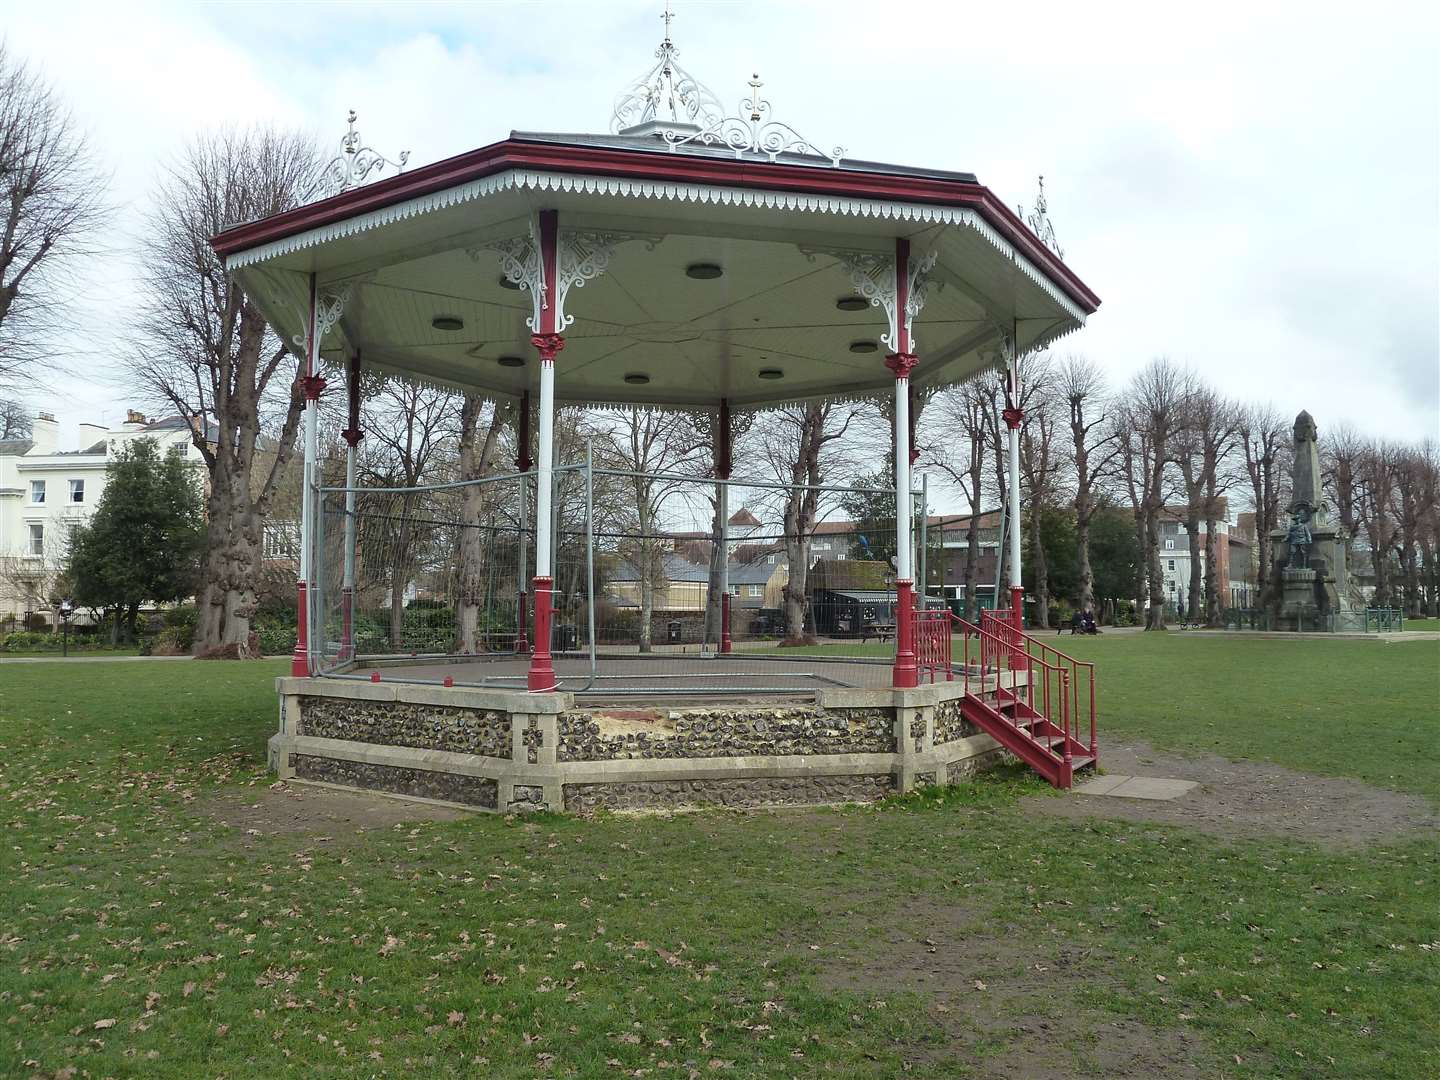 The bandstand at the Dane John Gardens. Picture: Mansell Jagger